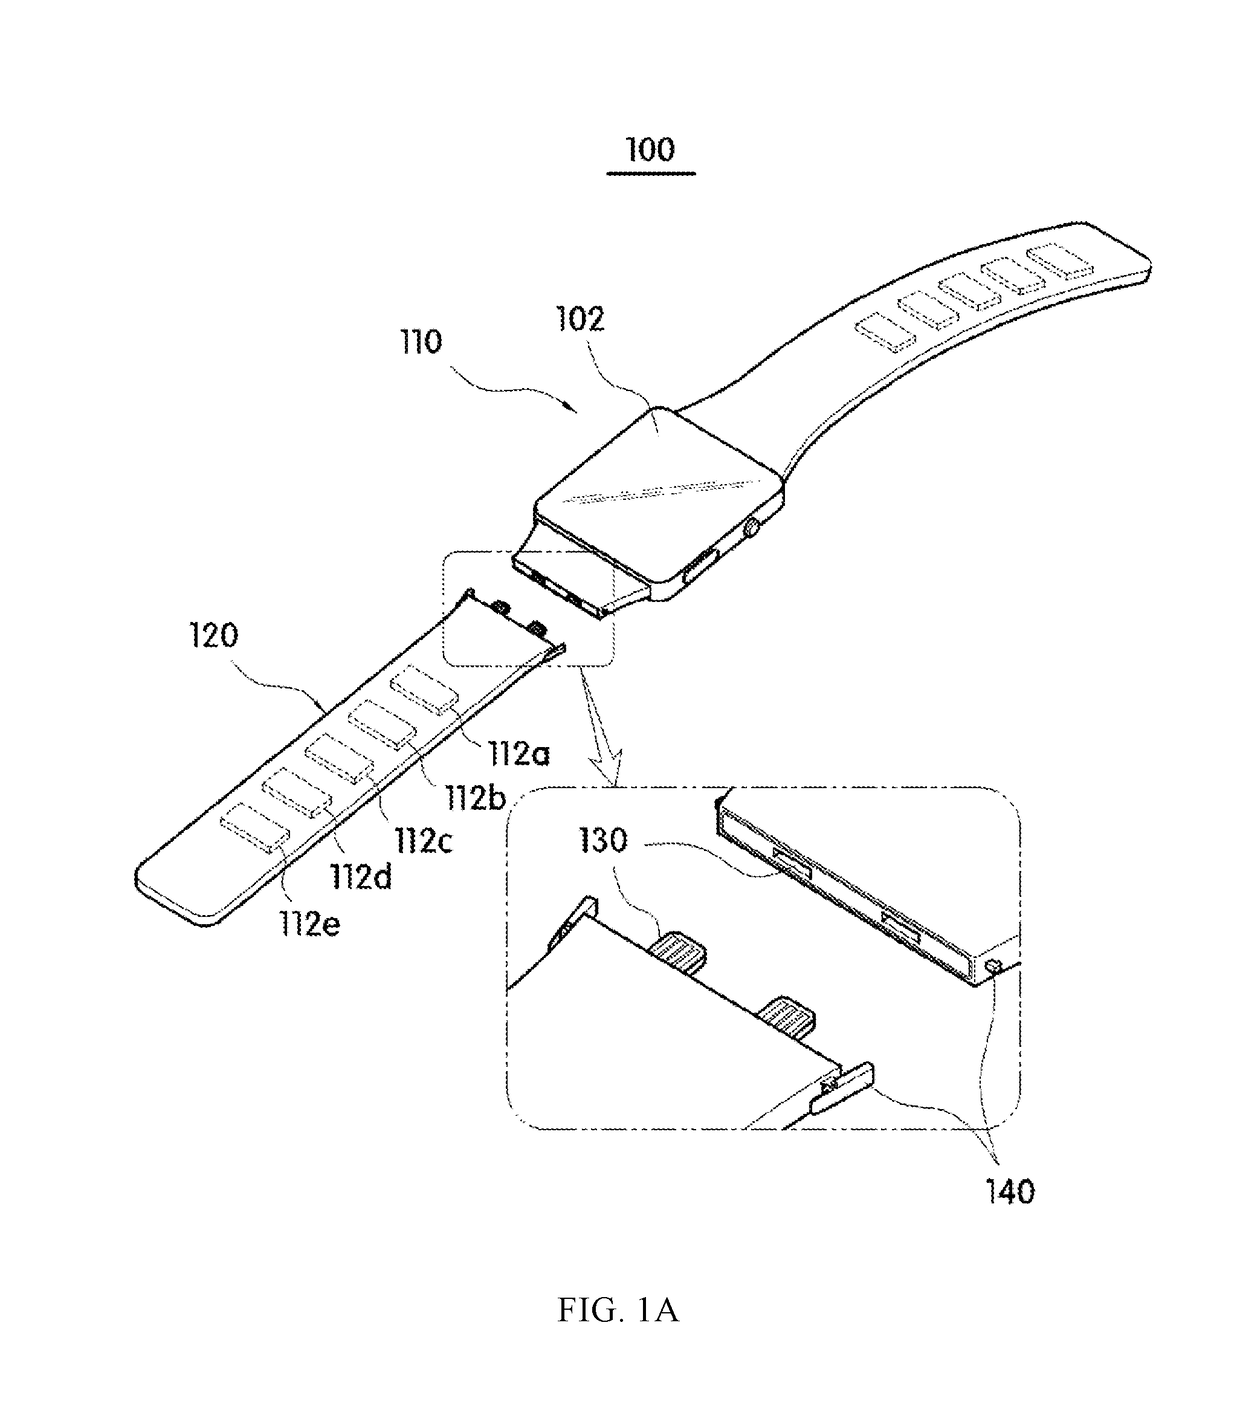 Wearable smart device having flexible semiconductor package mounted on a band